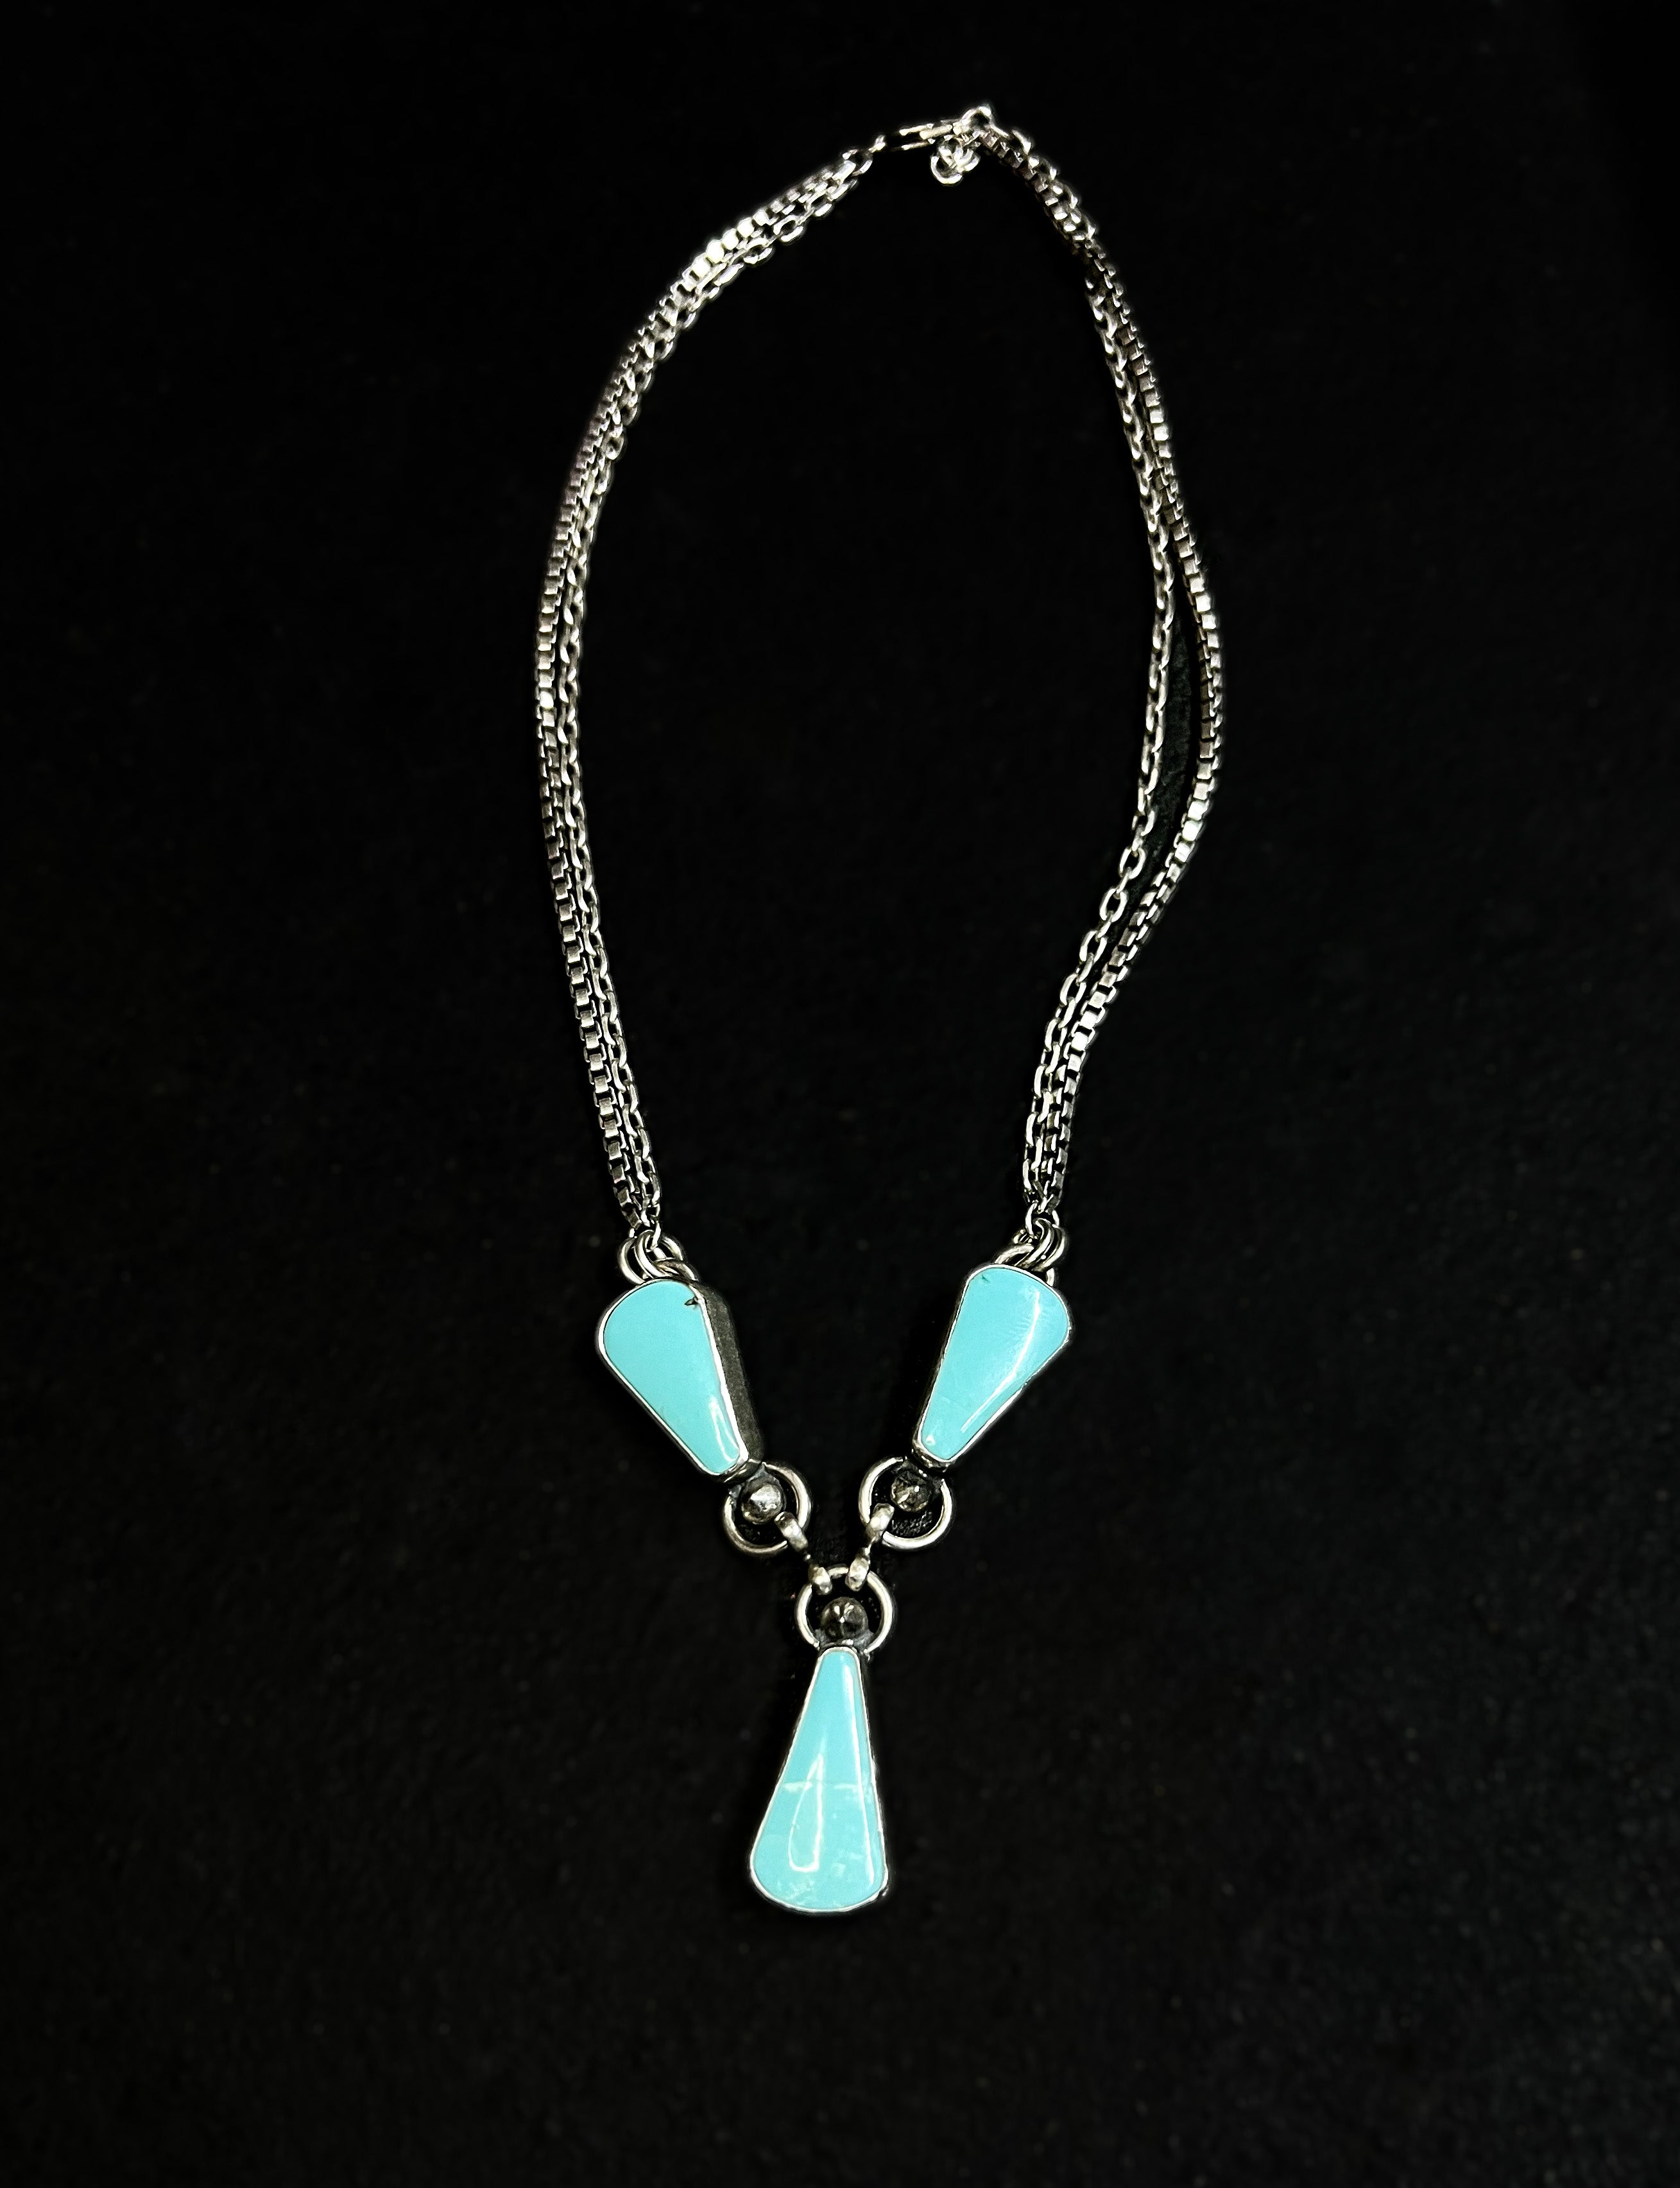 Triple turquoise heavy necklace